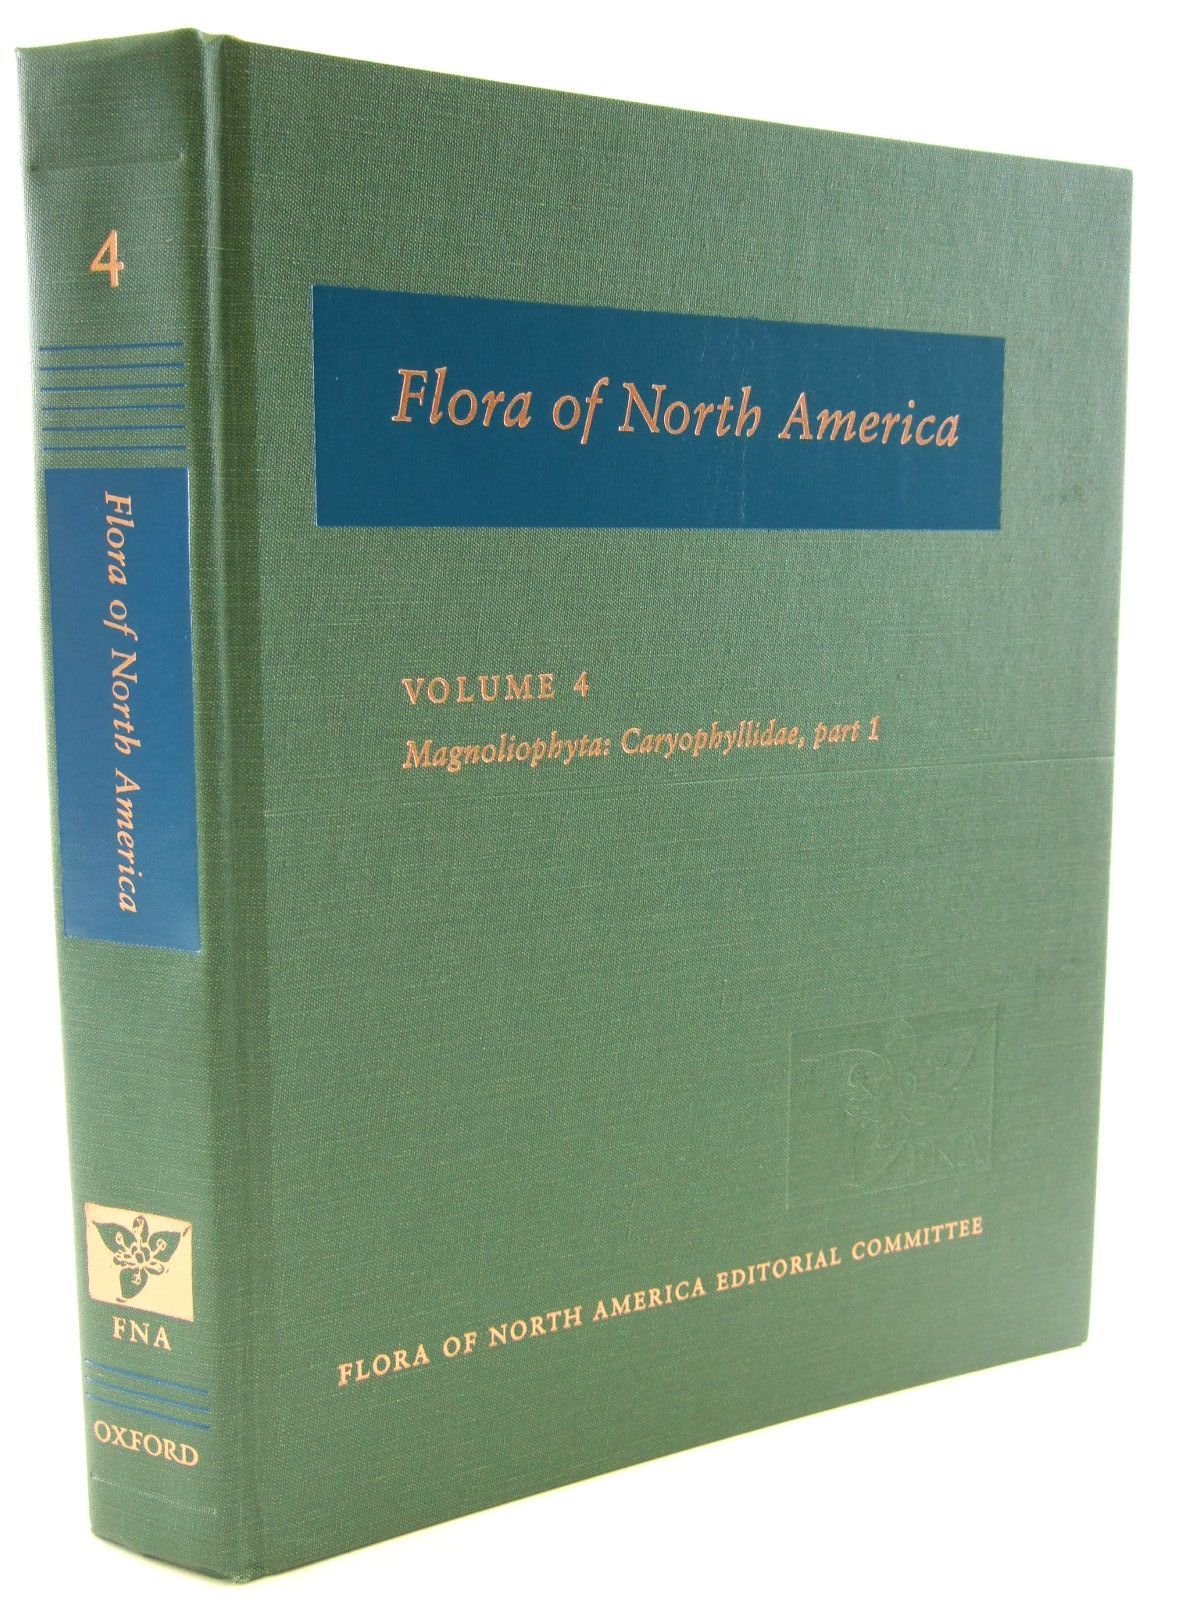 Photo of FLORA OF NORTH AMERICA VOLUME 4 MAGNOLIOPHYTA: CARYOPHYLLIDAE, PART 1 published by Oxford University Press (STOCK CODE: 1206574)  for sale by Stella & Rose's Books